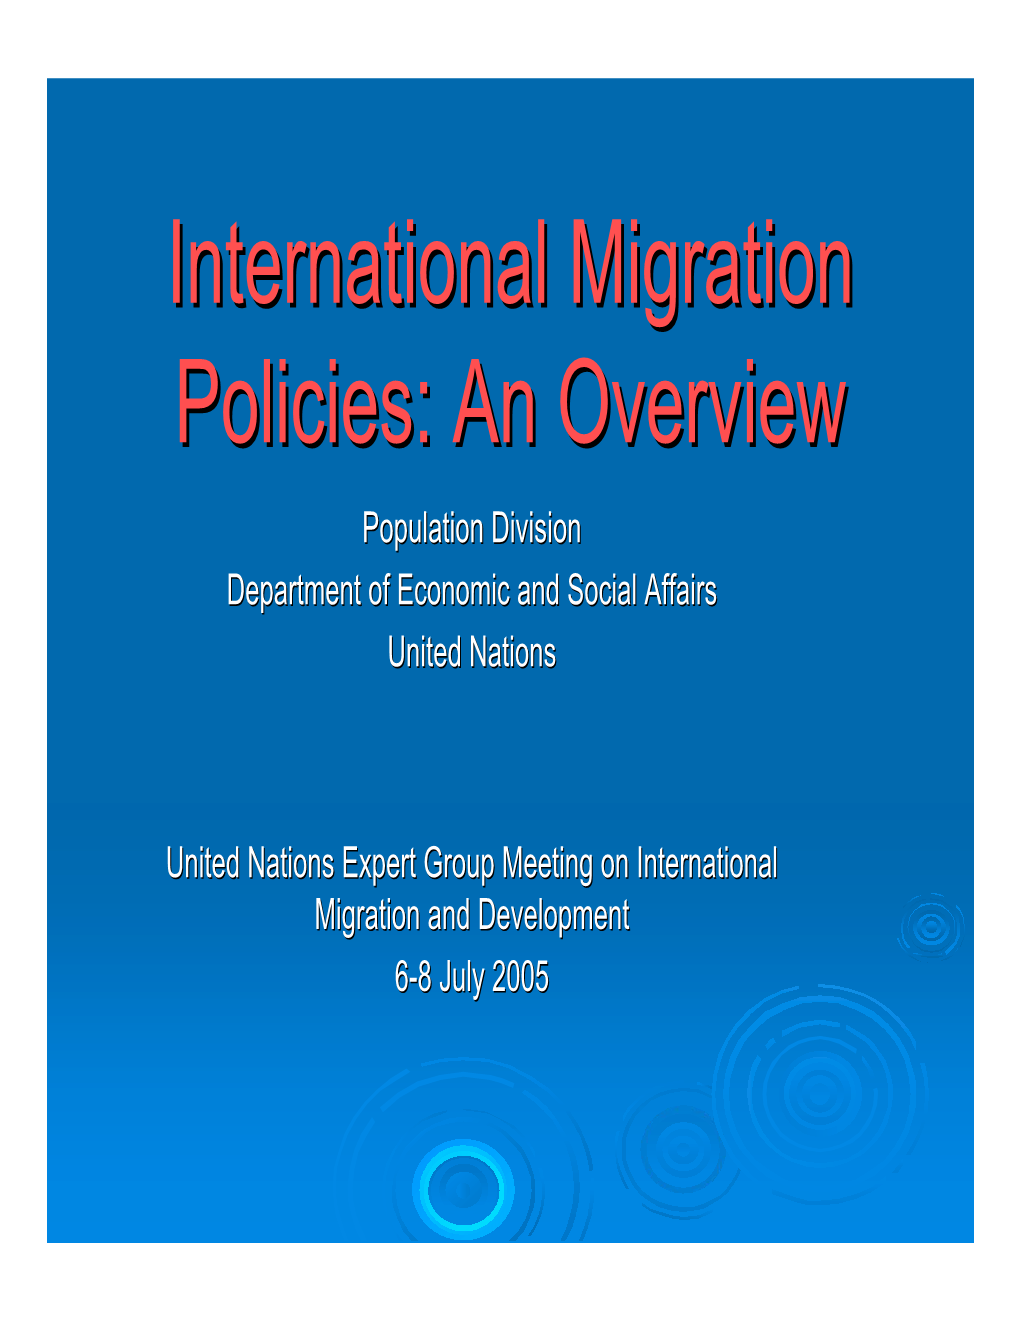 International Migration Policies: an Overview